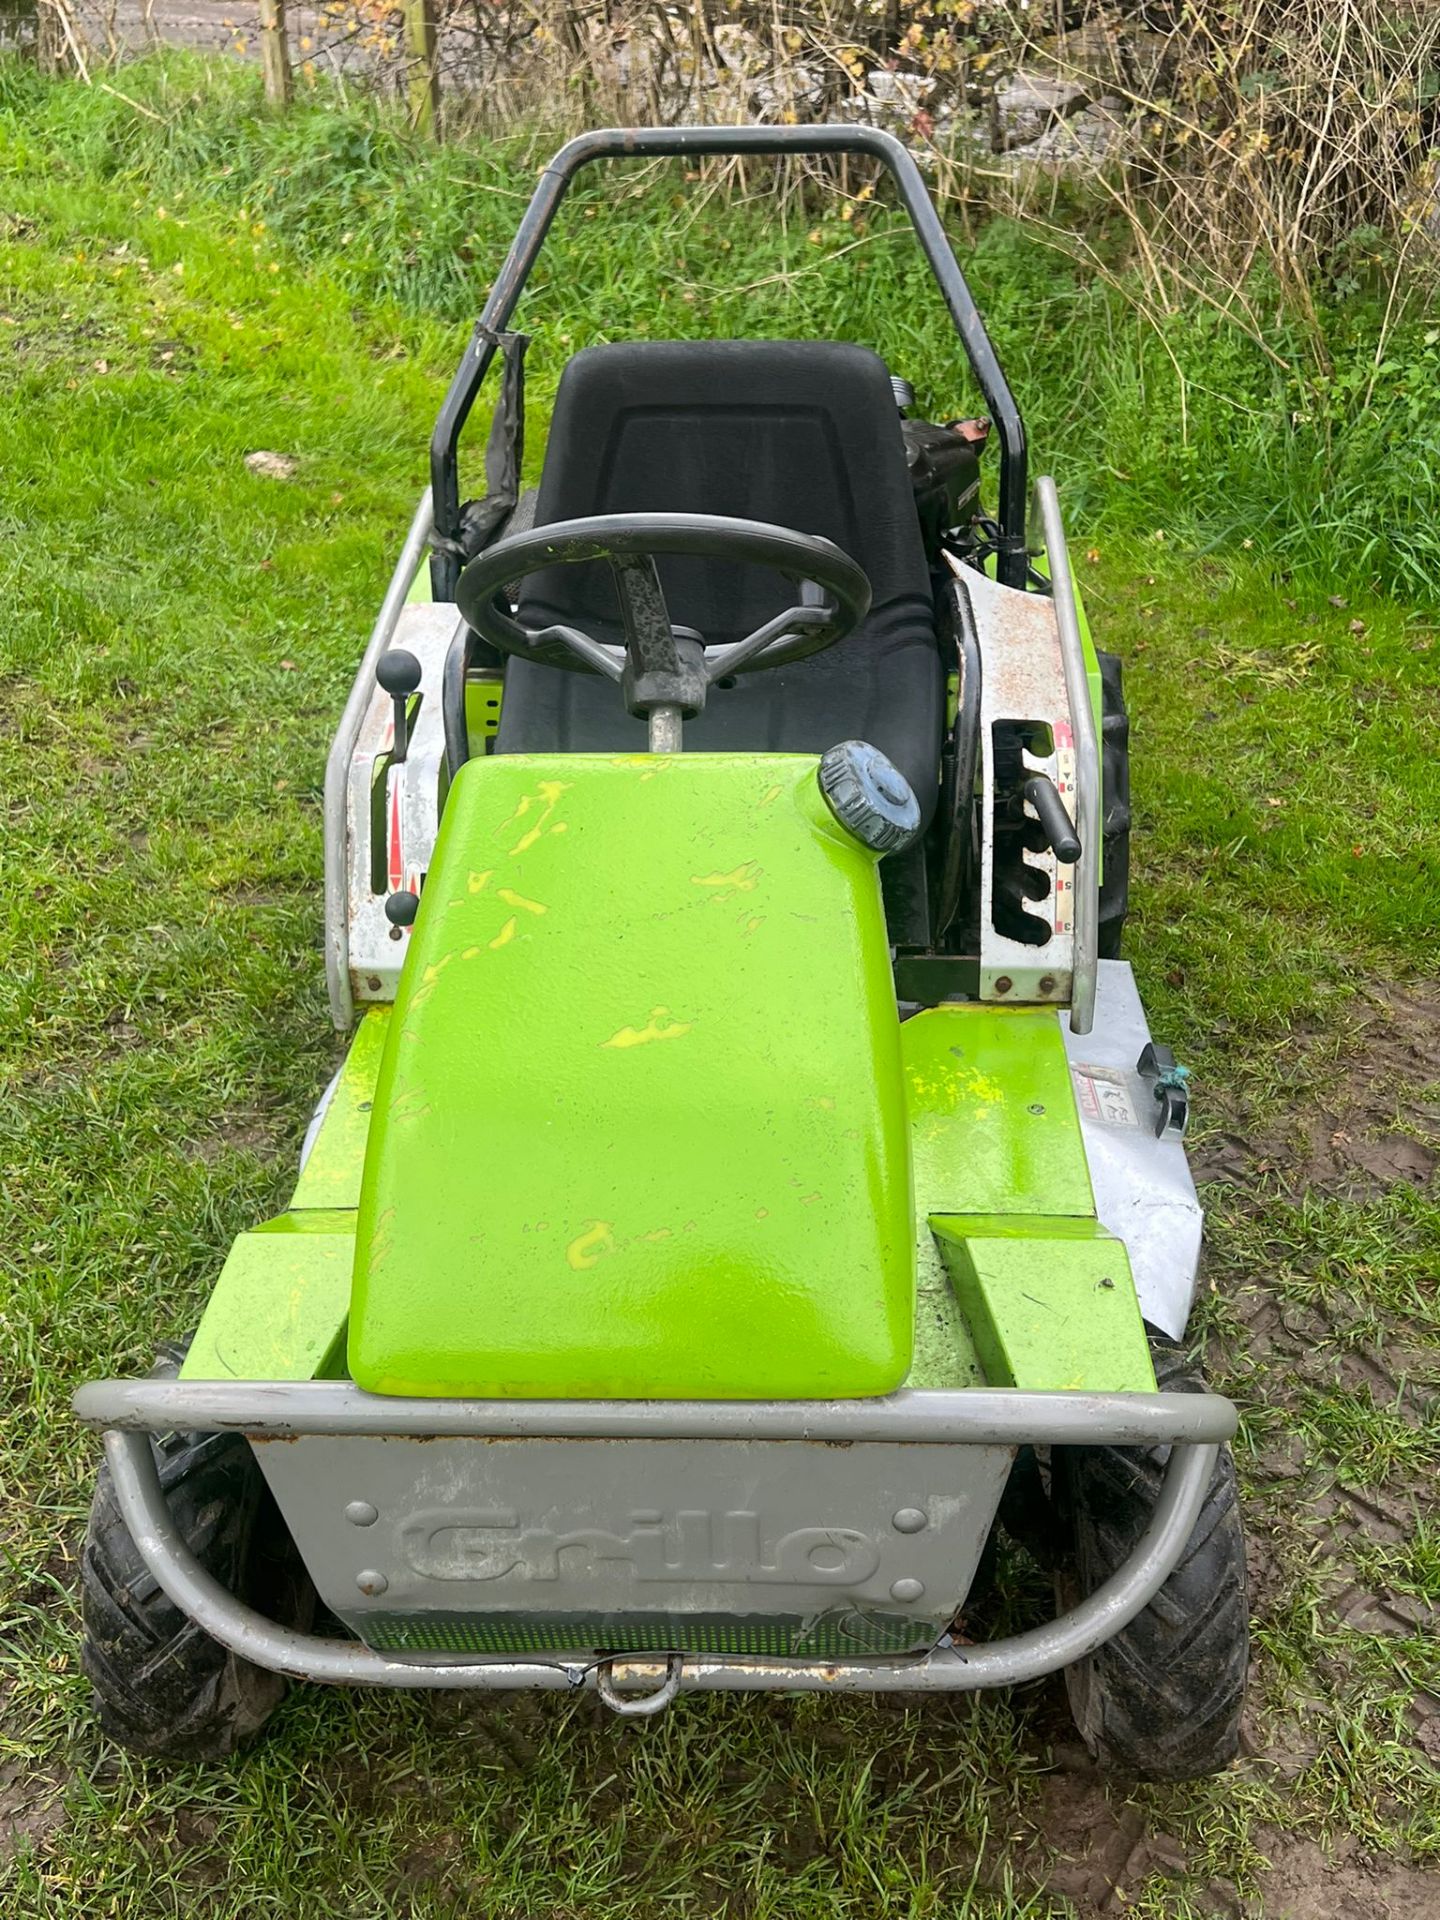 GRILLO CLIMBER 910 RIDE ON LAWN MOWER BANK MOWER - 18HP V TWIN BRIGGS AND STRATTON ENGINE *PLUS VAT* - Image 4 of 8